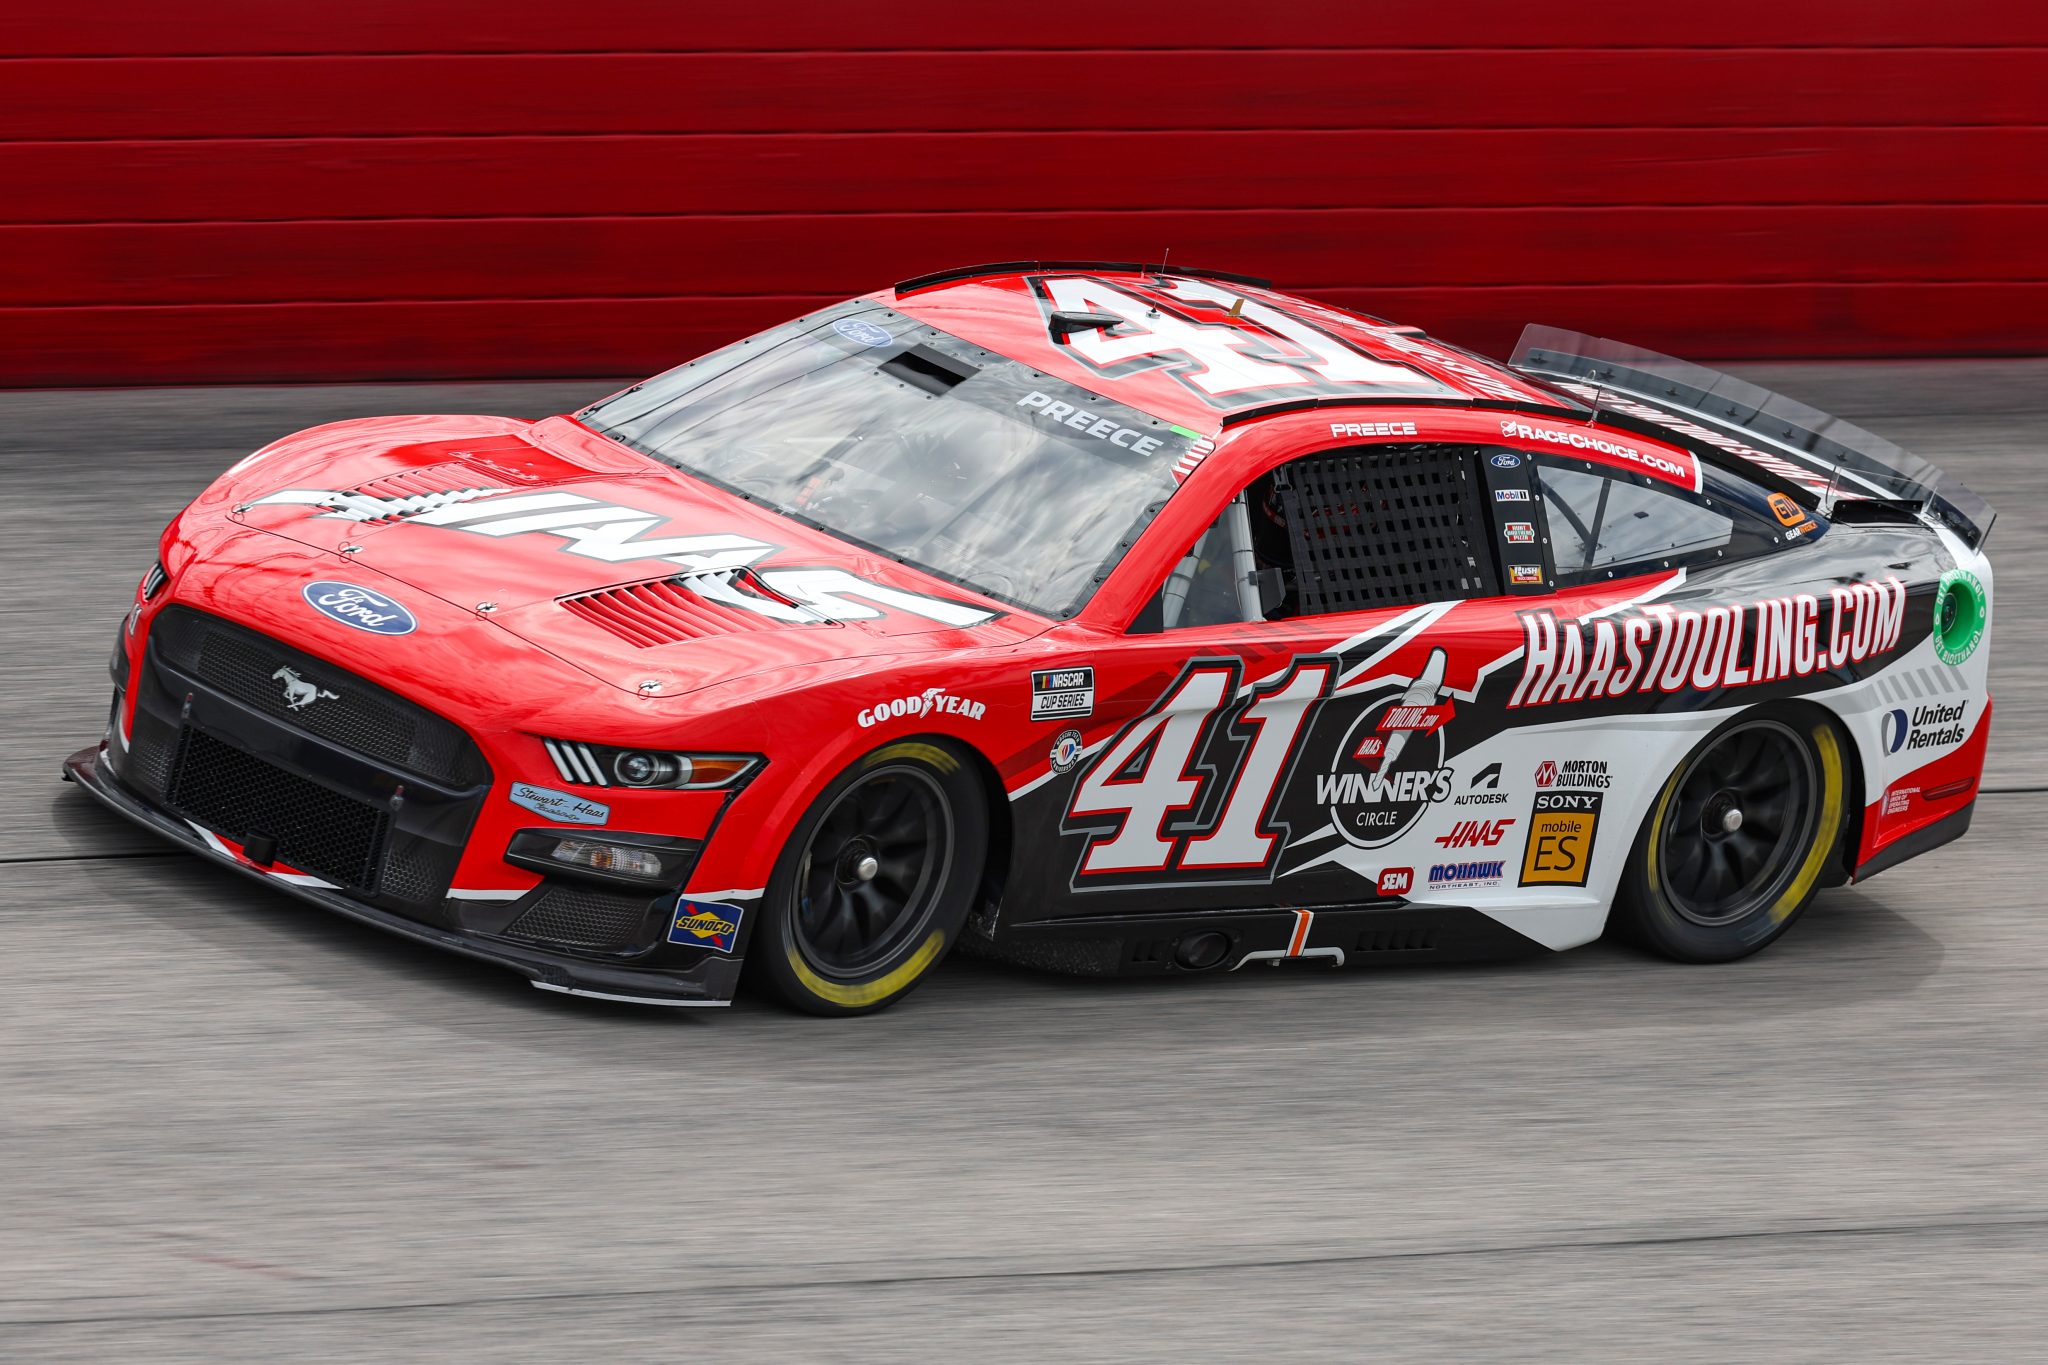 Double Triumph: Stewart-Haas Racing's Success with Top-Five Finish at Darlington